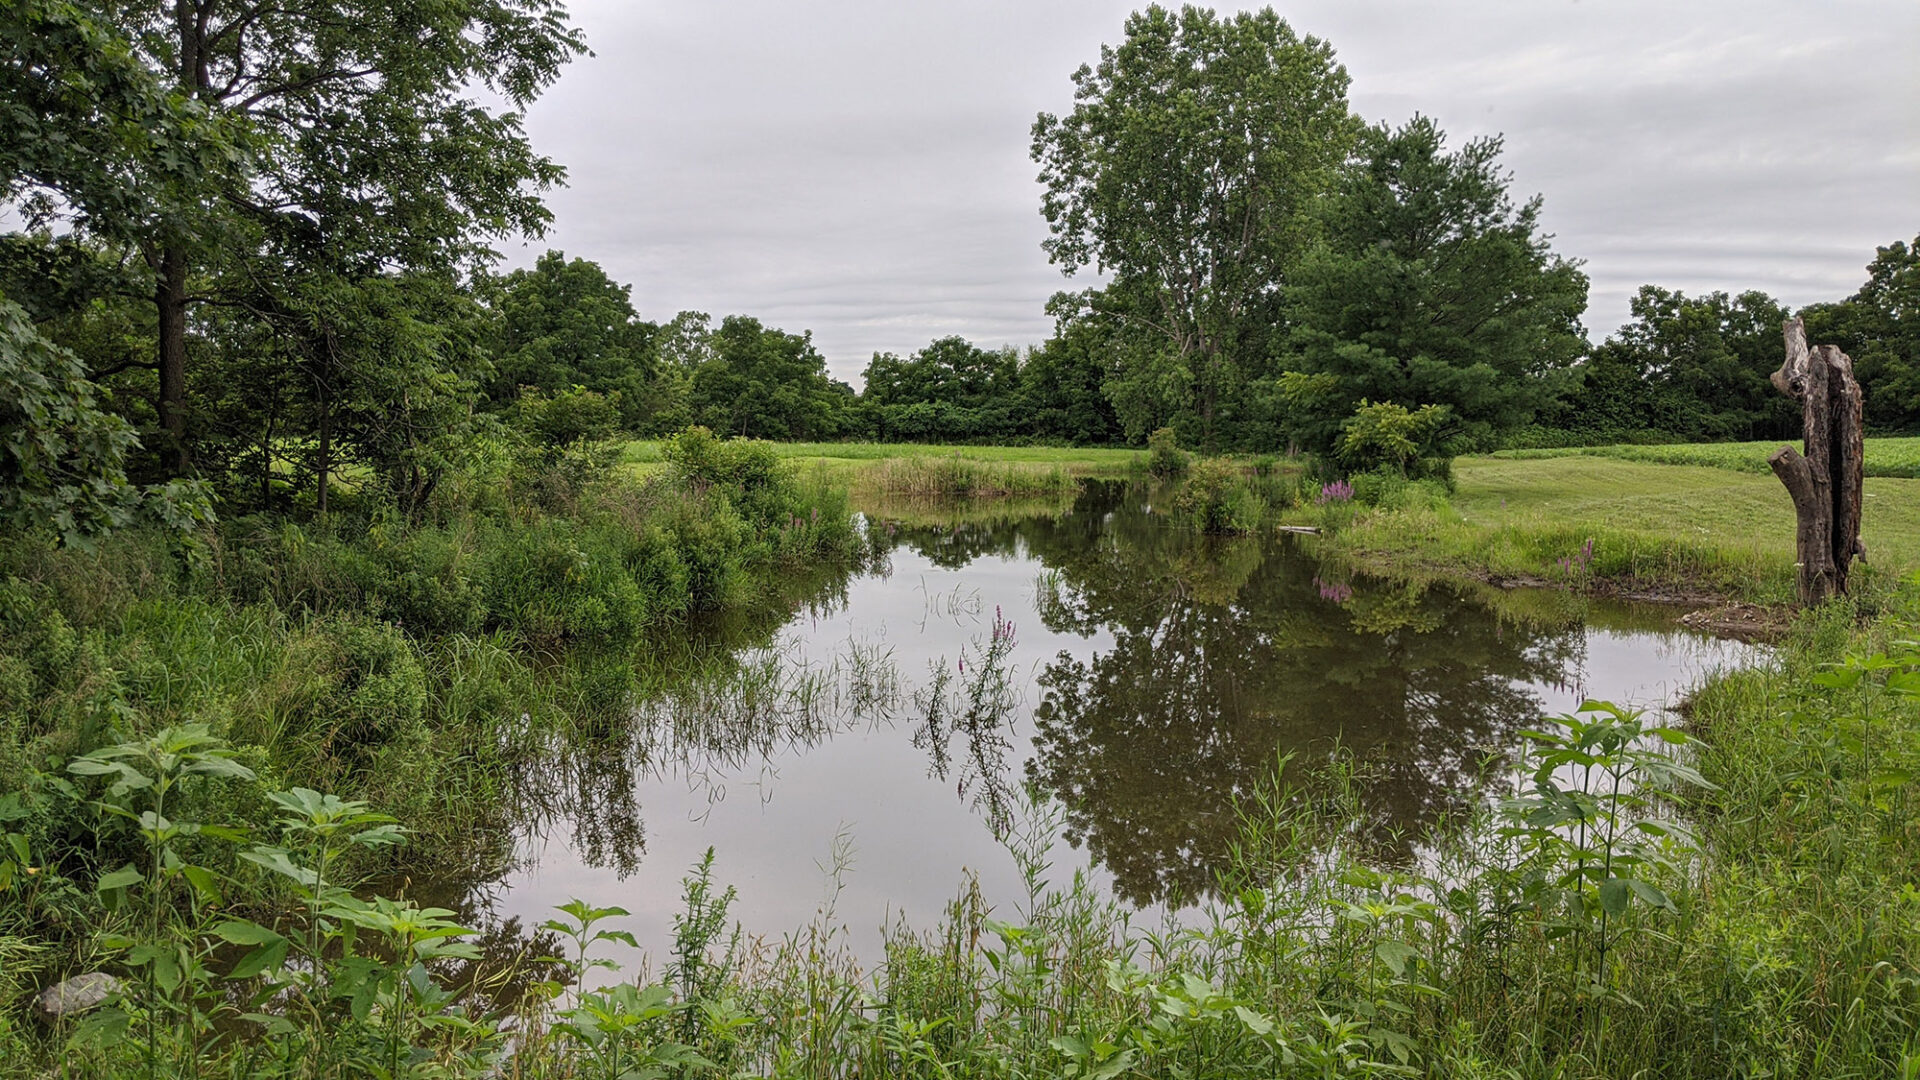 A functioning wetland ecosystem on a farm in Middlesex County.